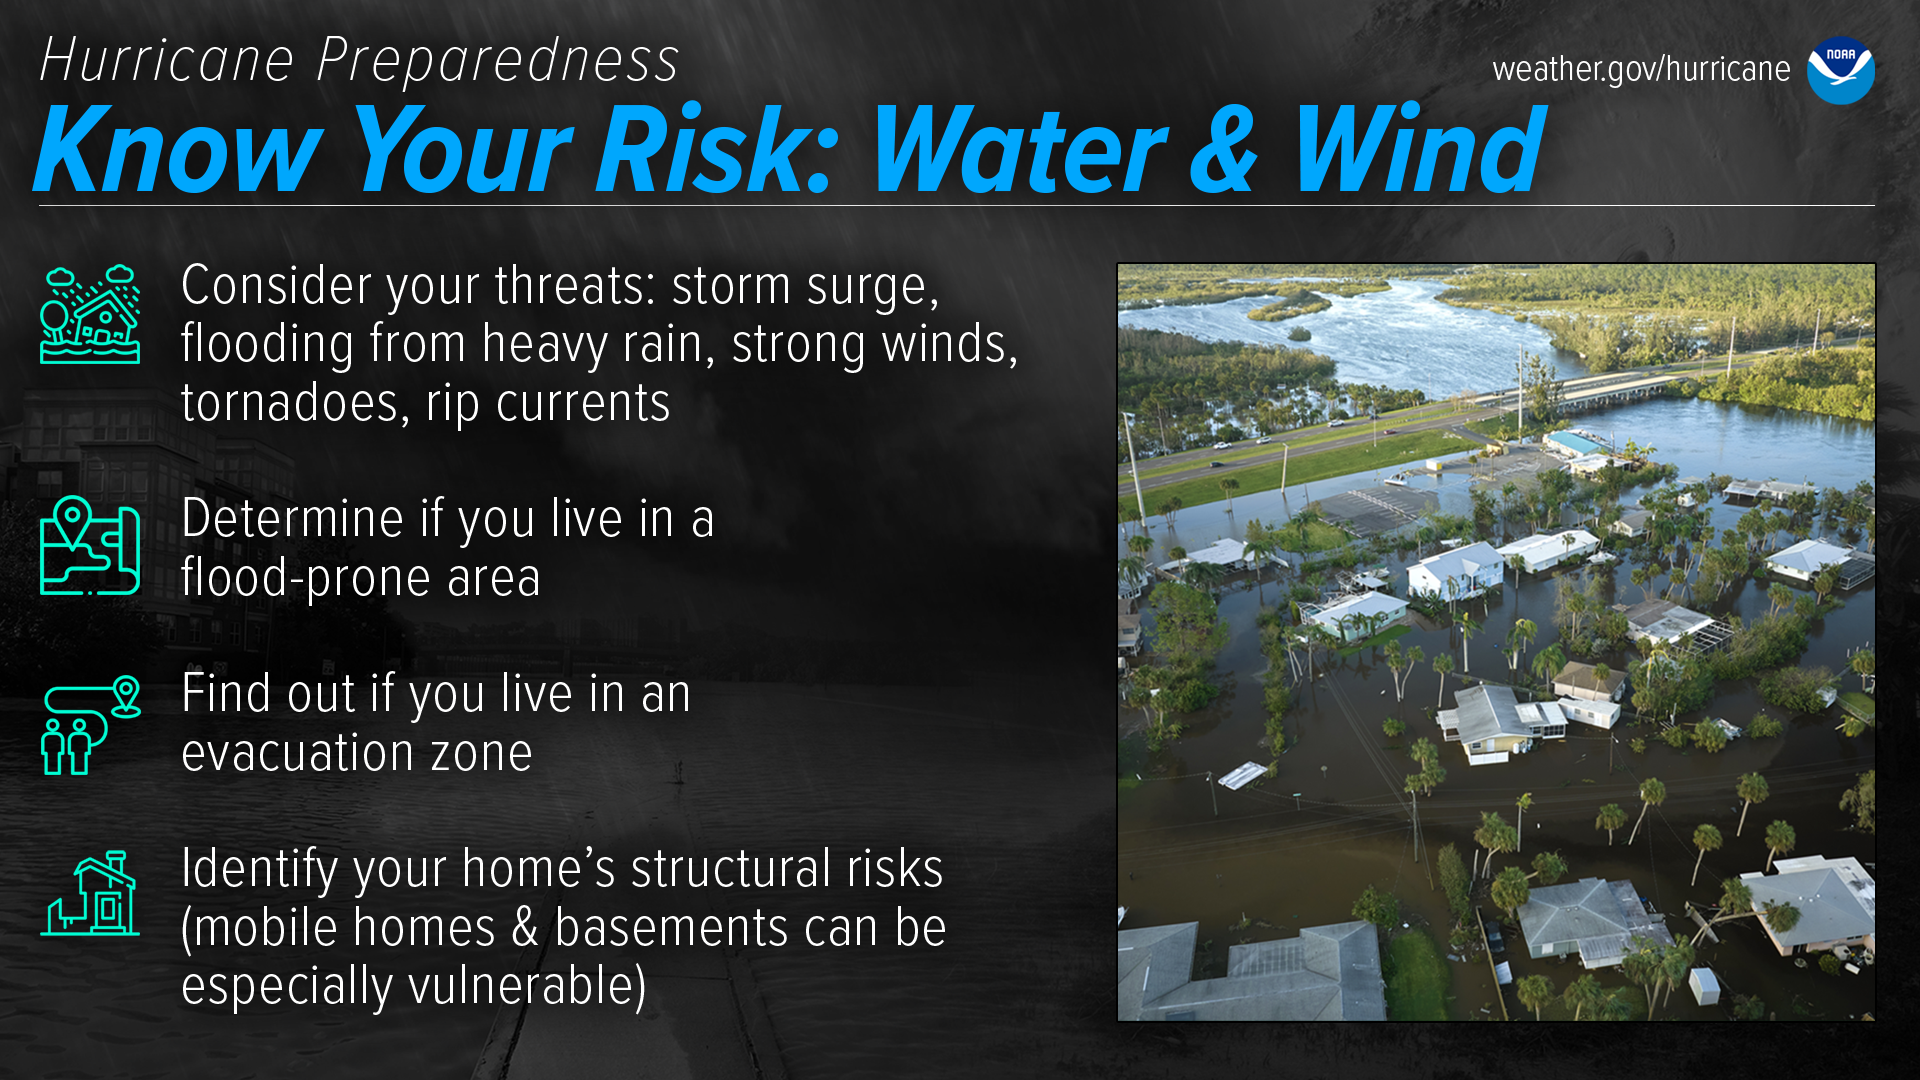 Hurricane Preparedness - Know Your Risk: Water & Wind. Consider your threats: storm surge, flooding from heavy rain, strong winds, tornadoes, rip currents. Determine if you live in a flood-prone area. Find out if you live in an evacuation zone. Identify your home's structural risk (mobile homes & basements can be especially vulnerable) ; Image credit: NOAA's National Weather Service